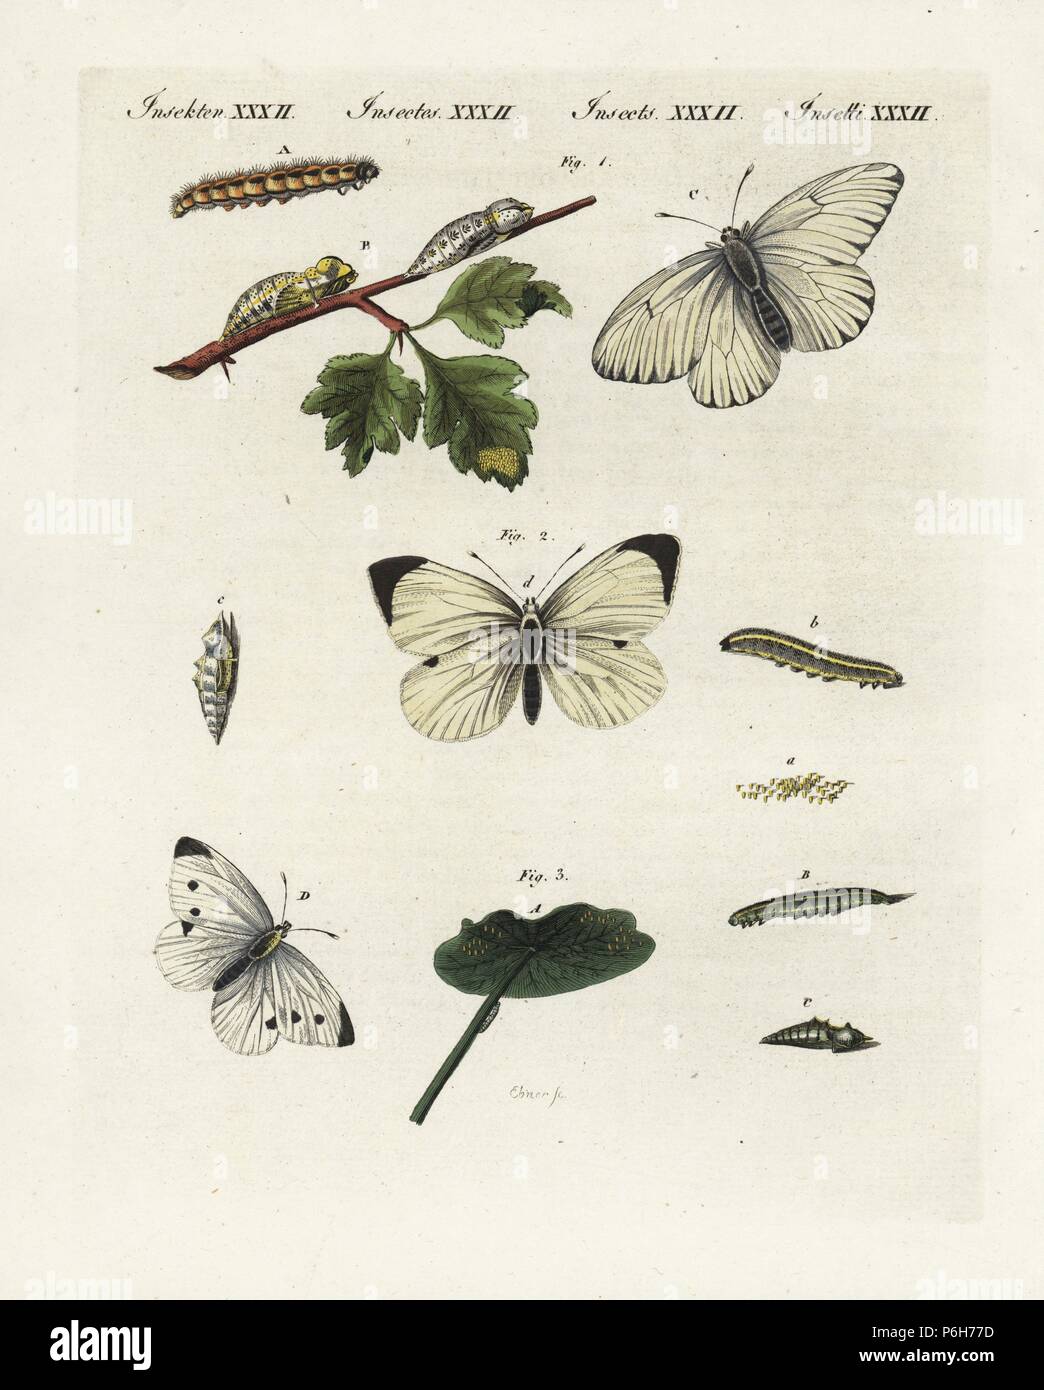 Black-veined white, Aporia crataegi, cabbage white, Pieris brassicae, and small white, Pieris rapae, butterfly, caterpillar, larva, pupa and egg. Handcoloured copperplate engraving from Bertuch's 'Bilderbuch fur Kinder' (Picture Book for Children), Weimar, 1805. Friedrich Johann Bertuch (1747-1822) was a German publisher and man of arts most famous for his 12-volume encyclopedia for children illustrated with 1,200 engraved plates on natural history, science, costume, mythology, etc., published from 1790-1830. Stock Photo